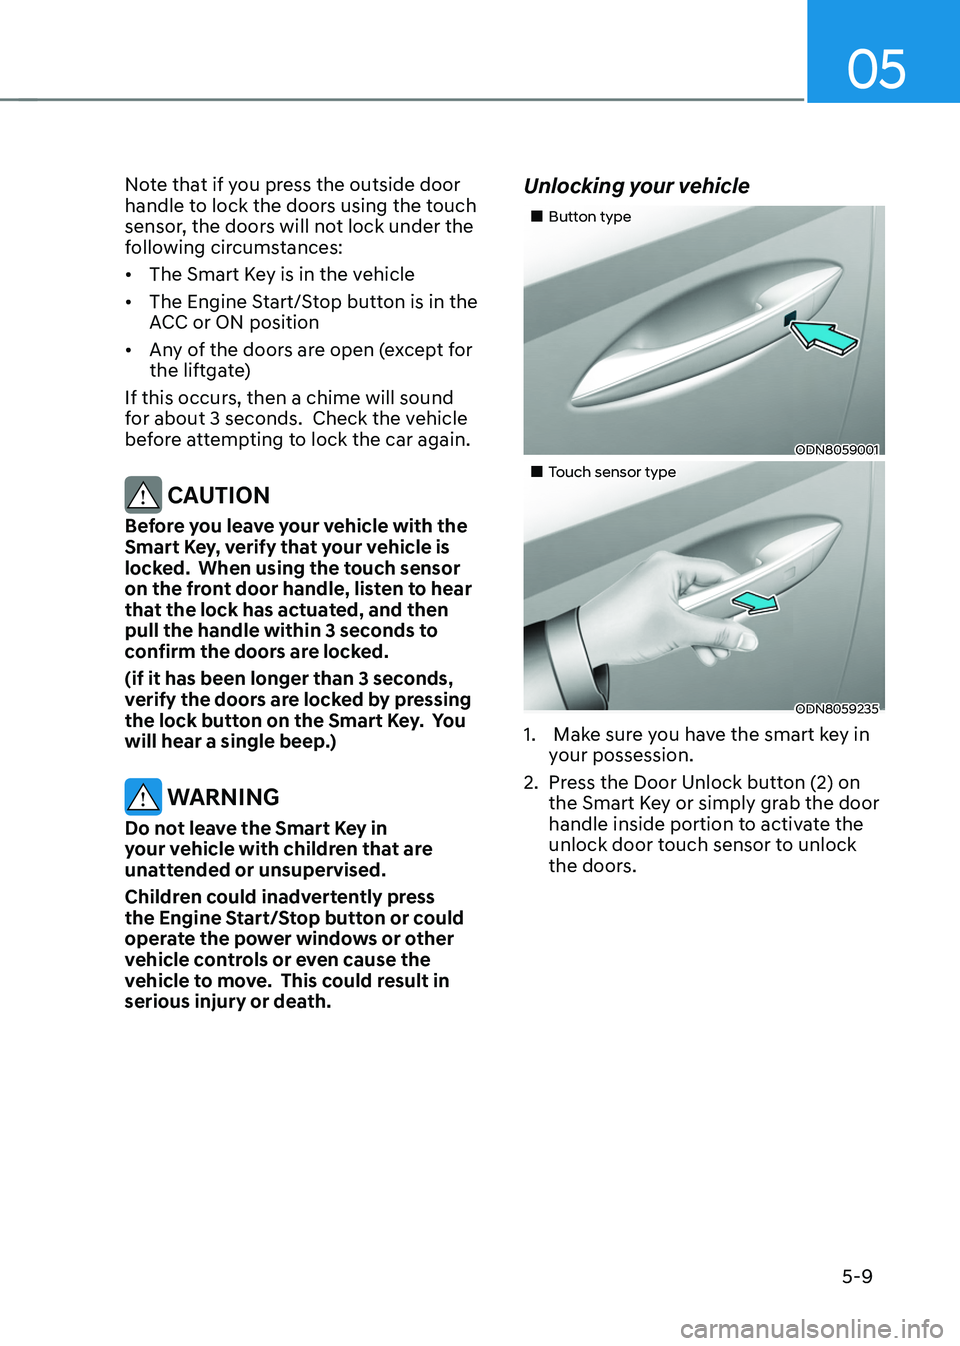 HYUNDAI TUCSON 2023  Owners Manual 05
5-9
Note that if you press the outside door 
handle to lock the doors using the touch 
sensor, the doors will not lock under the 
following circumstances:
•	The Smart Key is in the vehicle
•	 T